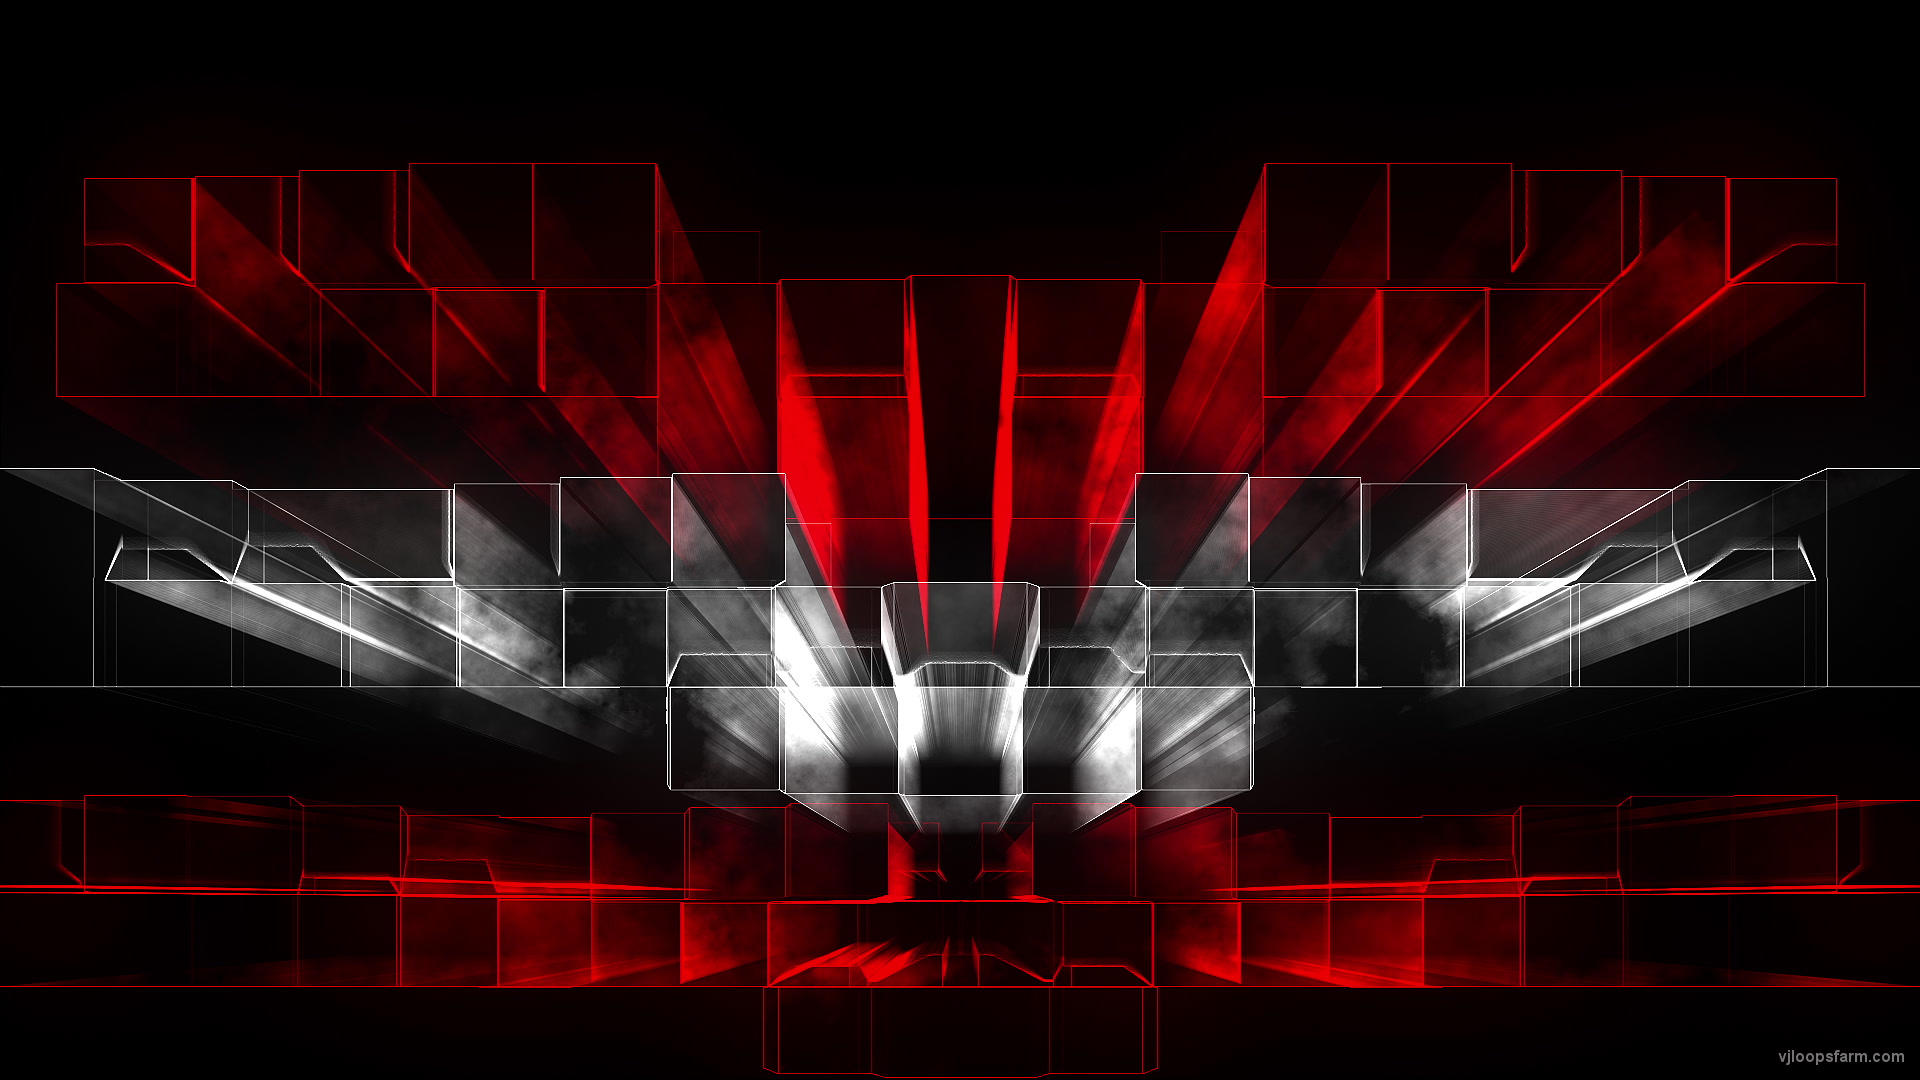 Rot-Weiss-Rot Square Lines Pattern Video Art VJ Loop